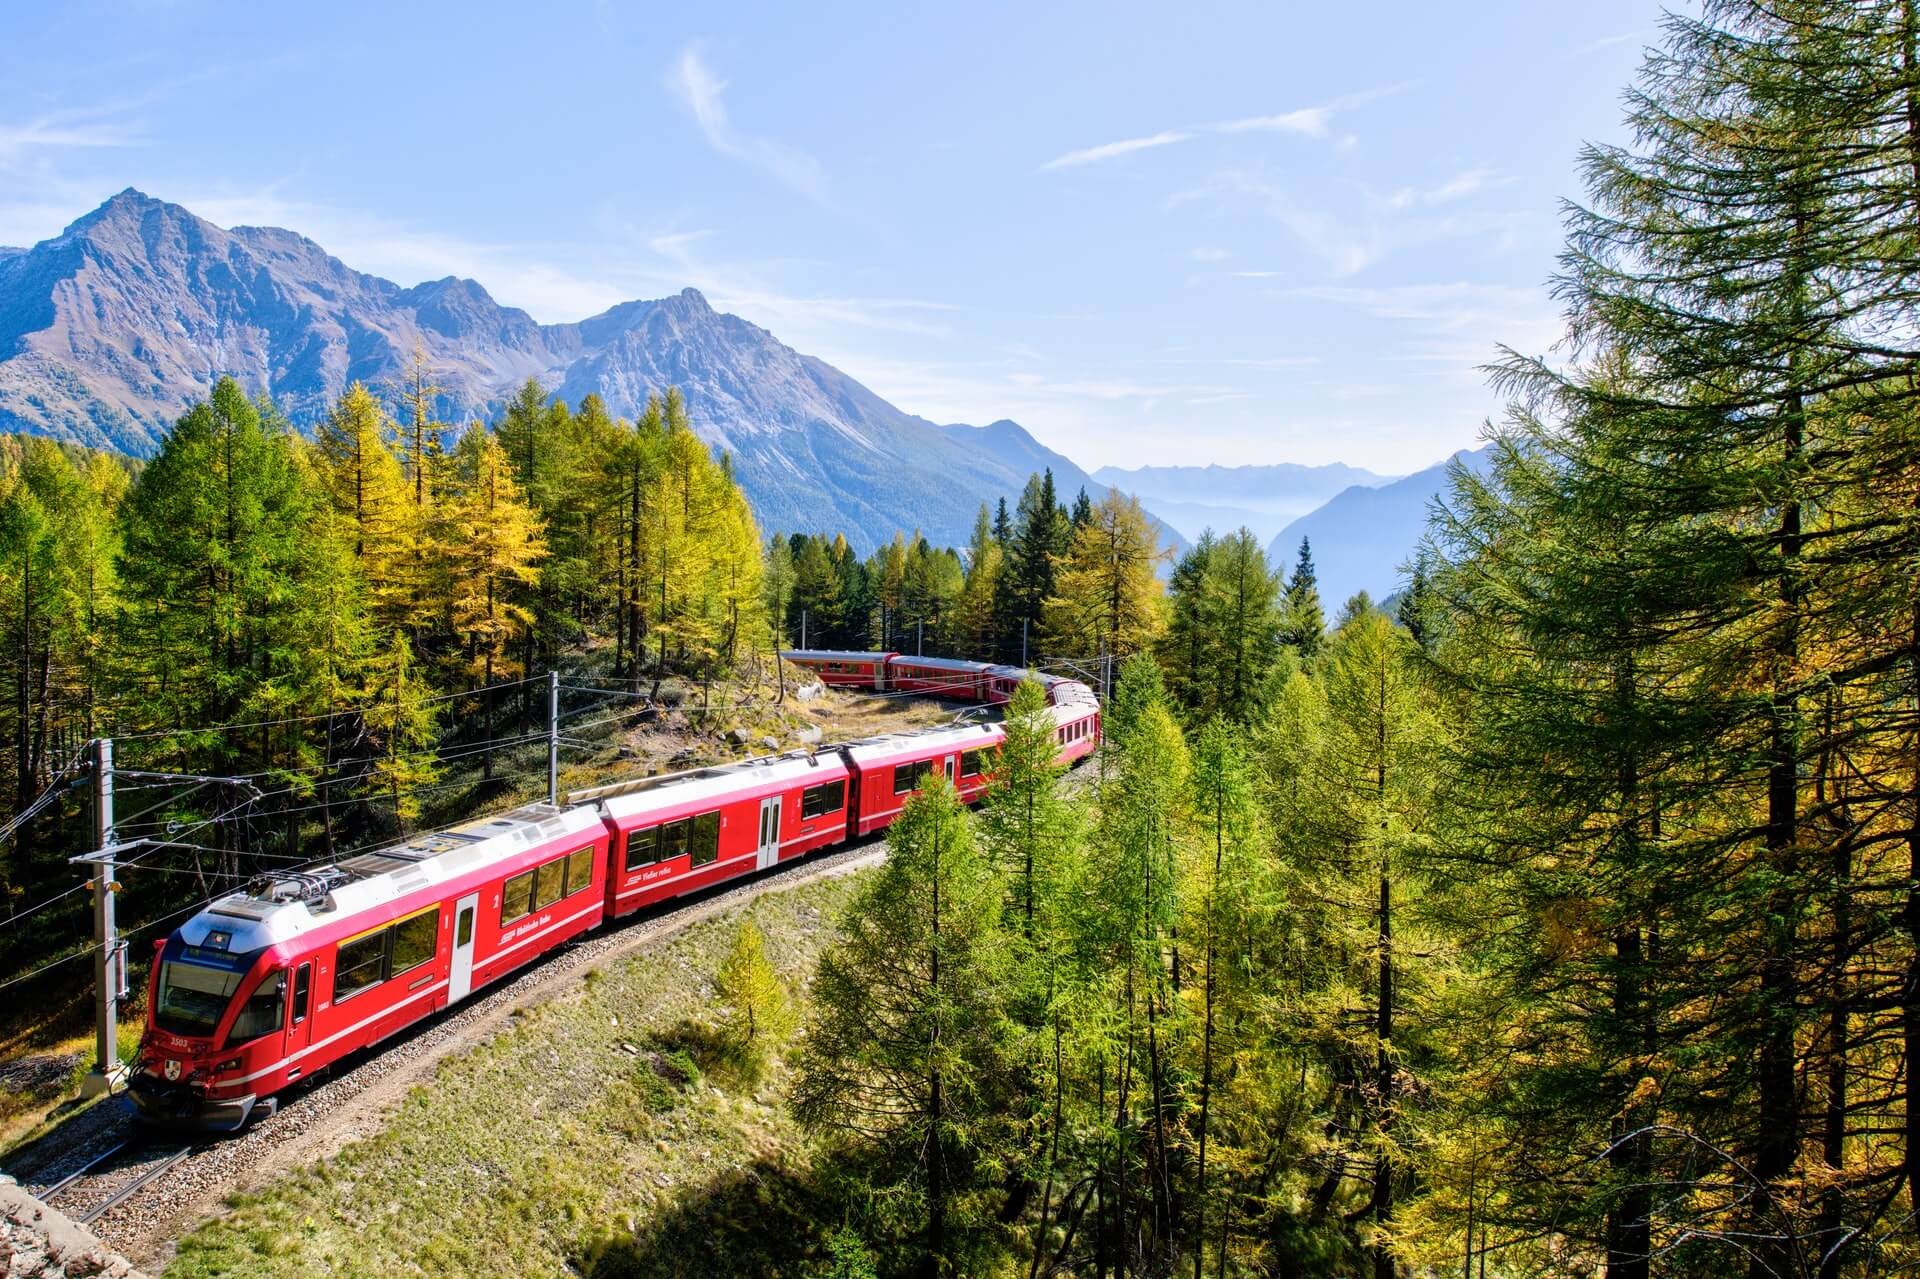 Train, Connecting Europe express, Journey through 100 towns, Uniting continents, 1920x1280 HD Desktop